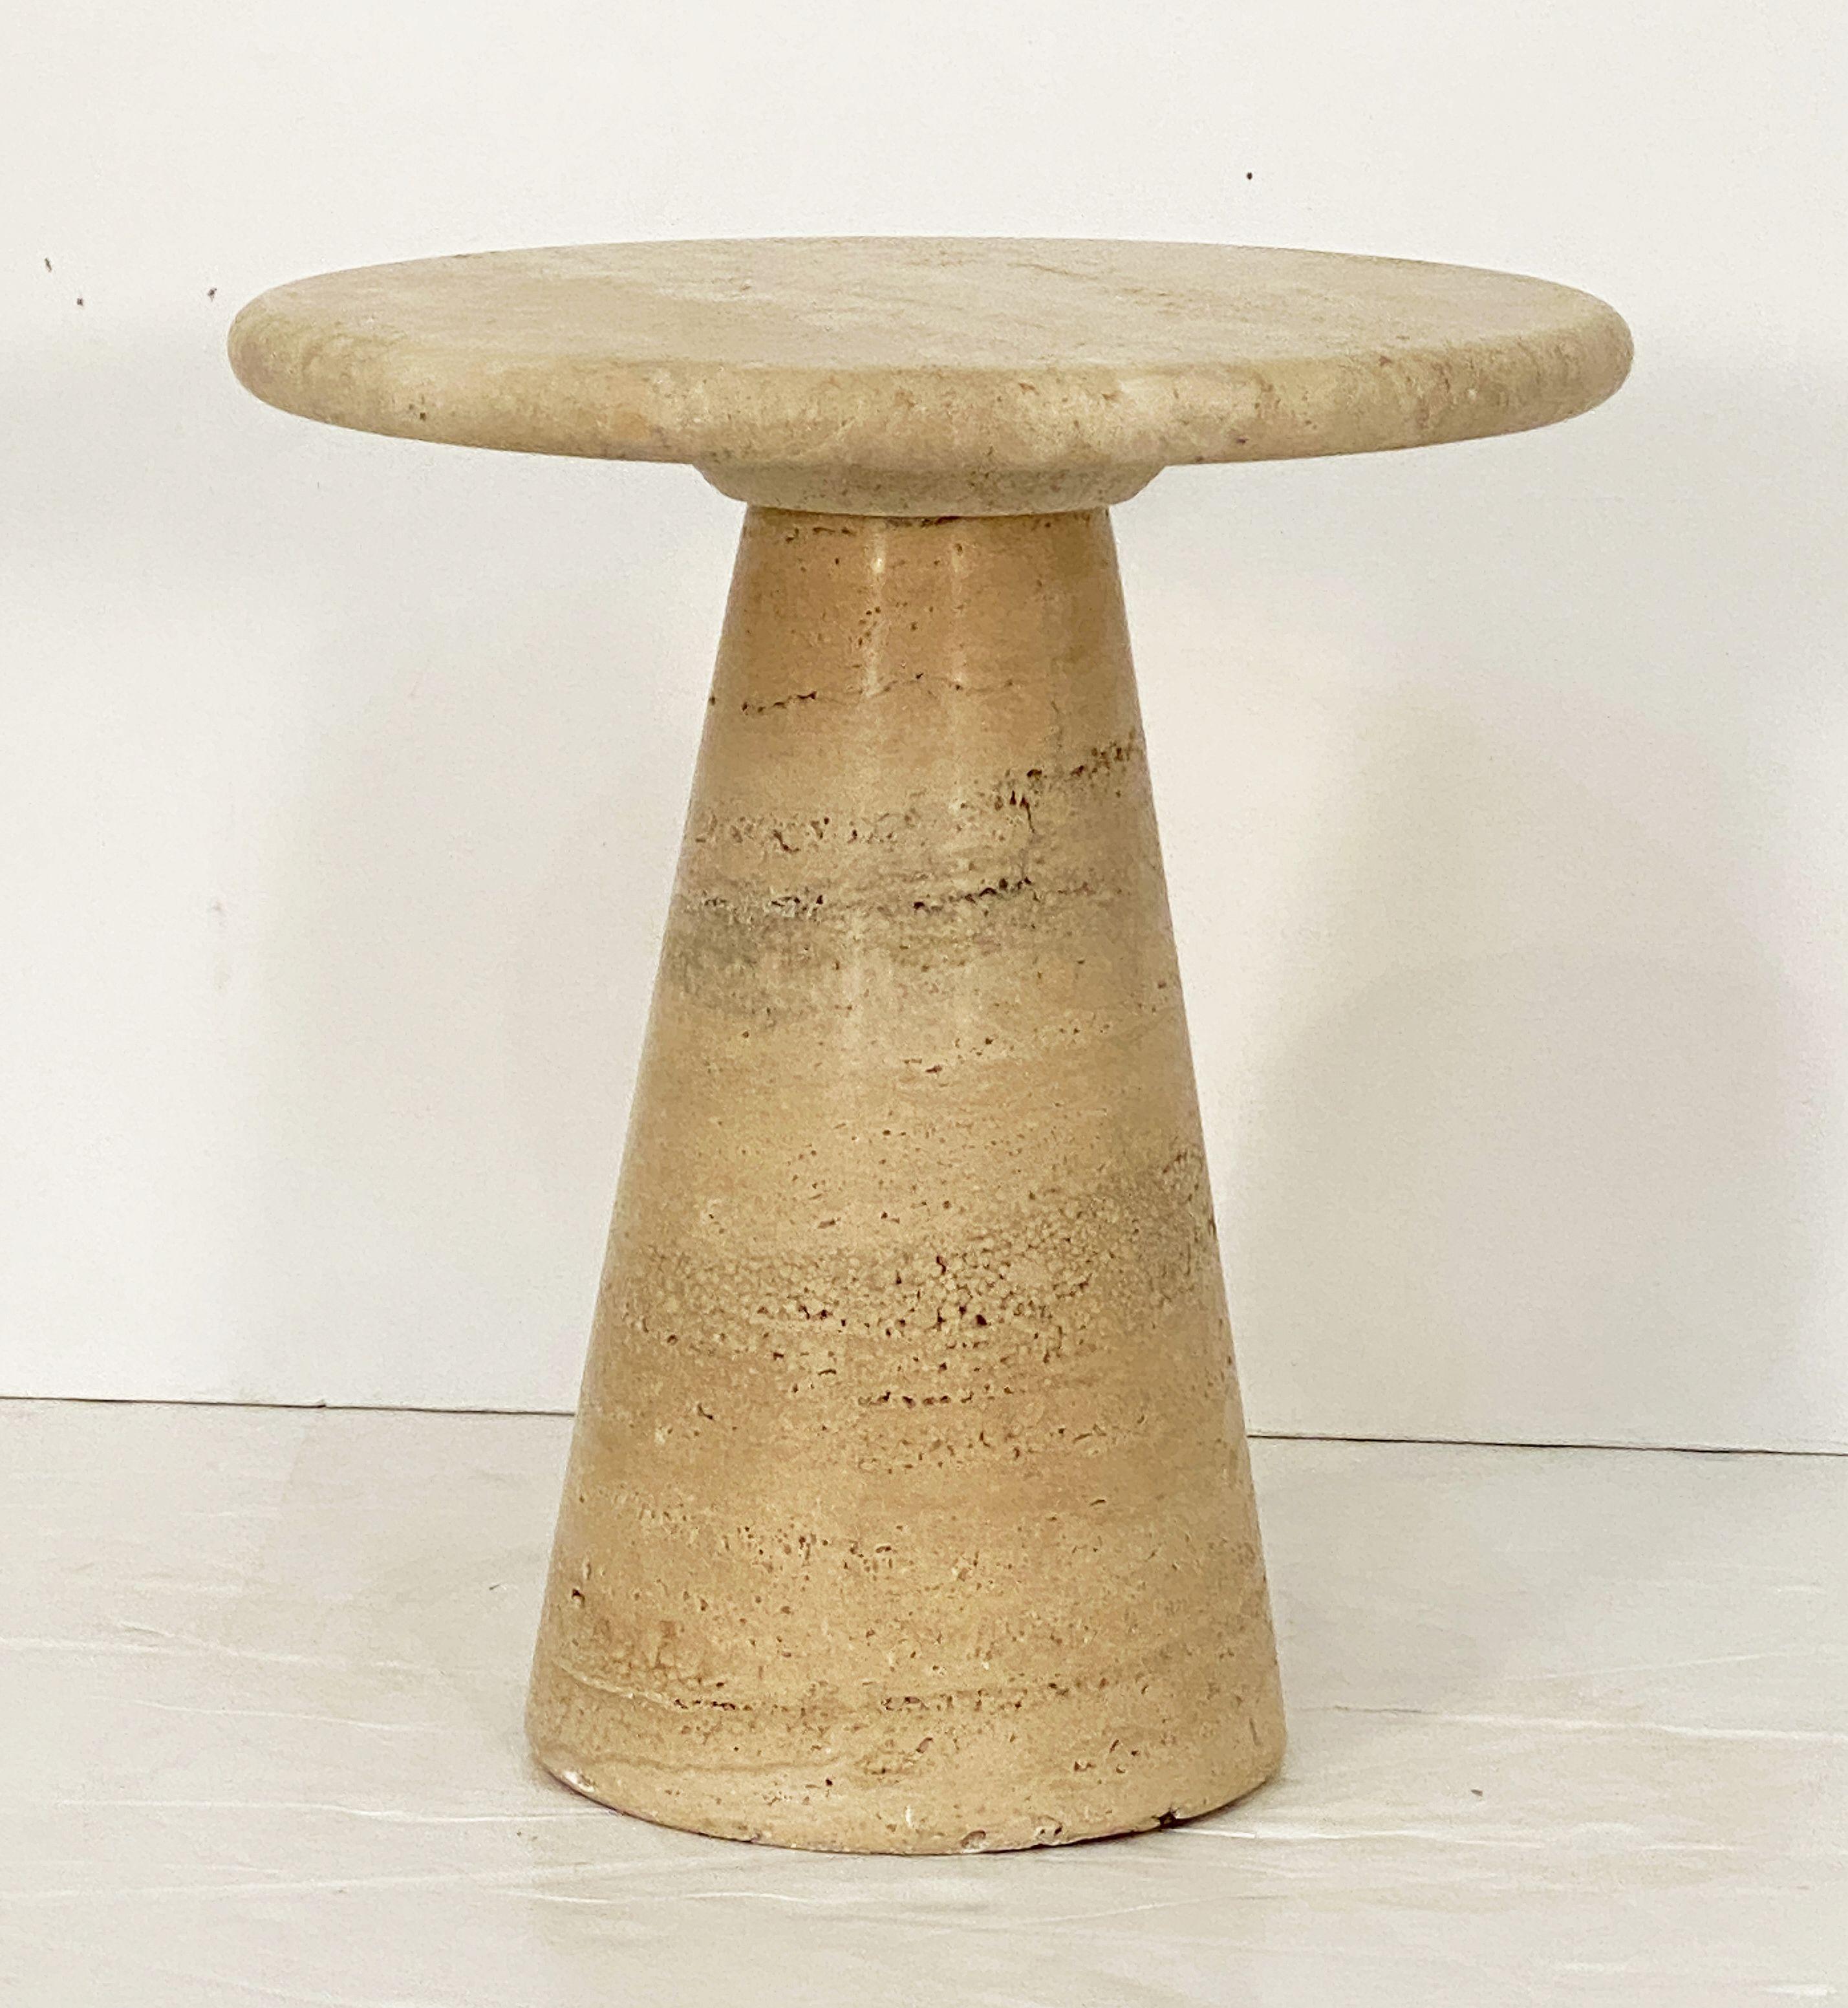 Modernist Conical Table of Travertine Stone from Italy (Four Available) For Sale 3